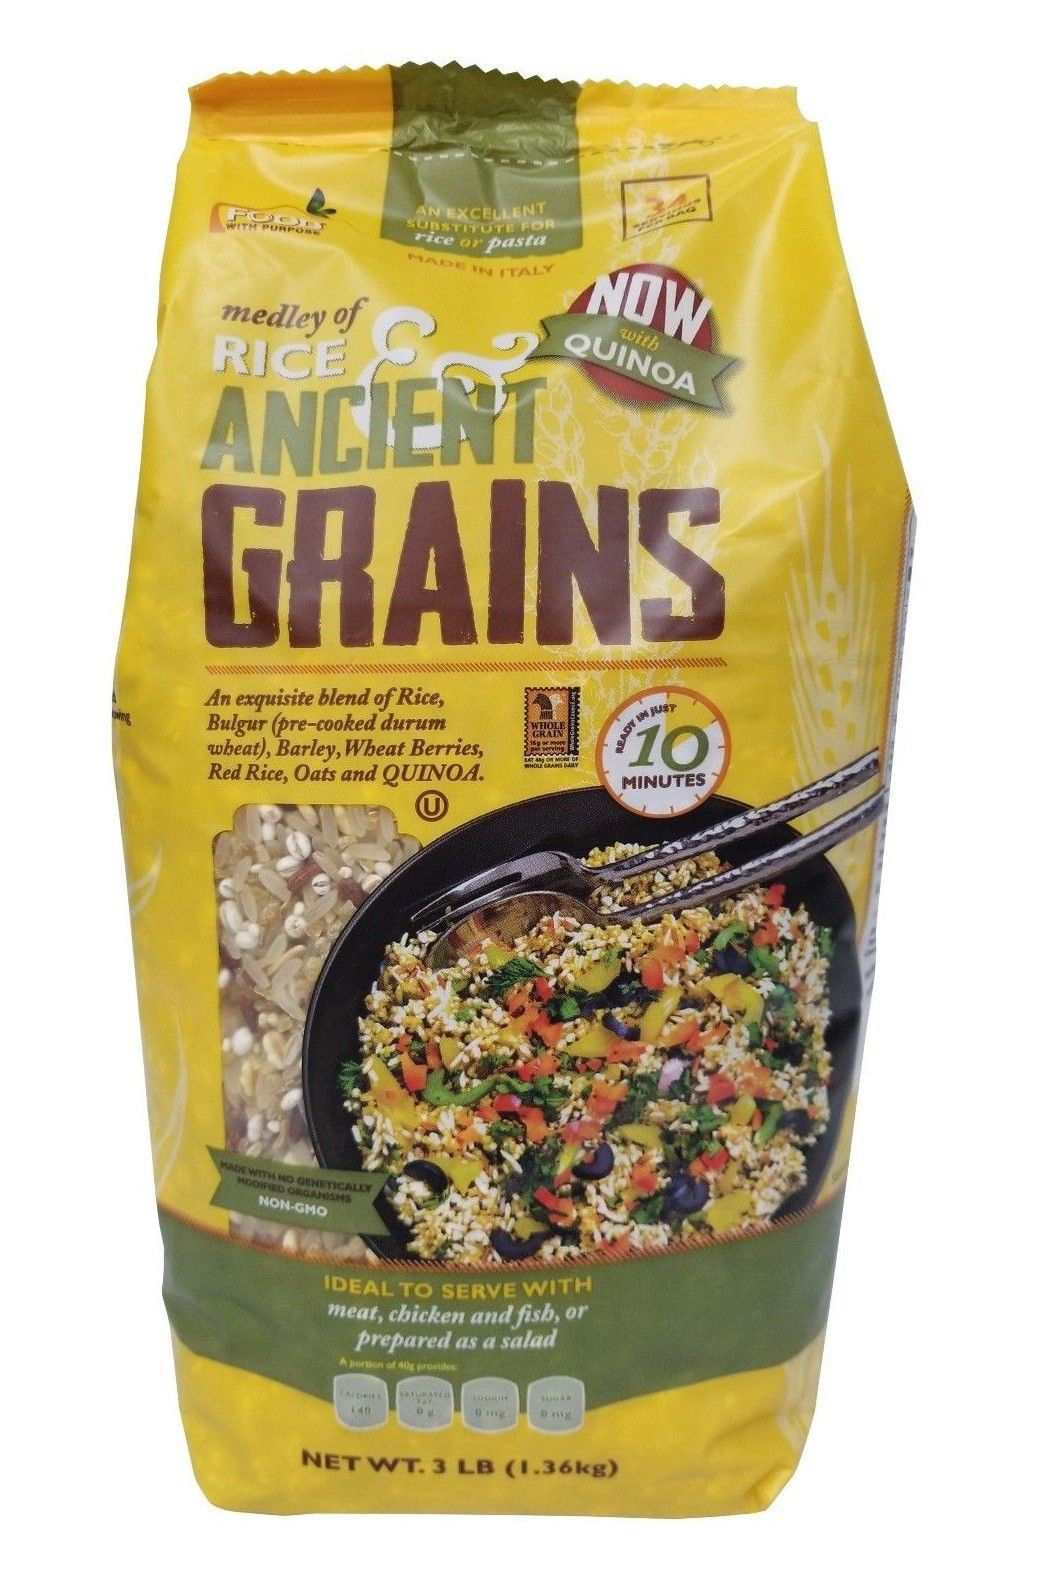 Ancient Grain Quinoa
 Food with Purpose Medley of Rice & Ancient Grains with